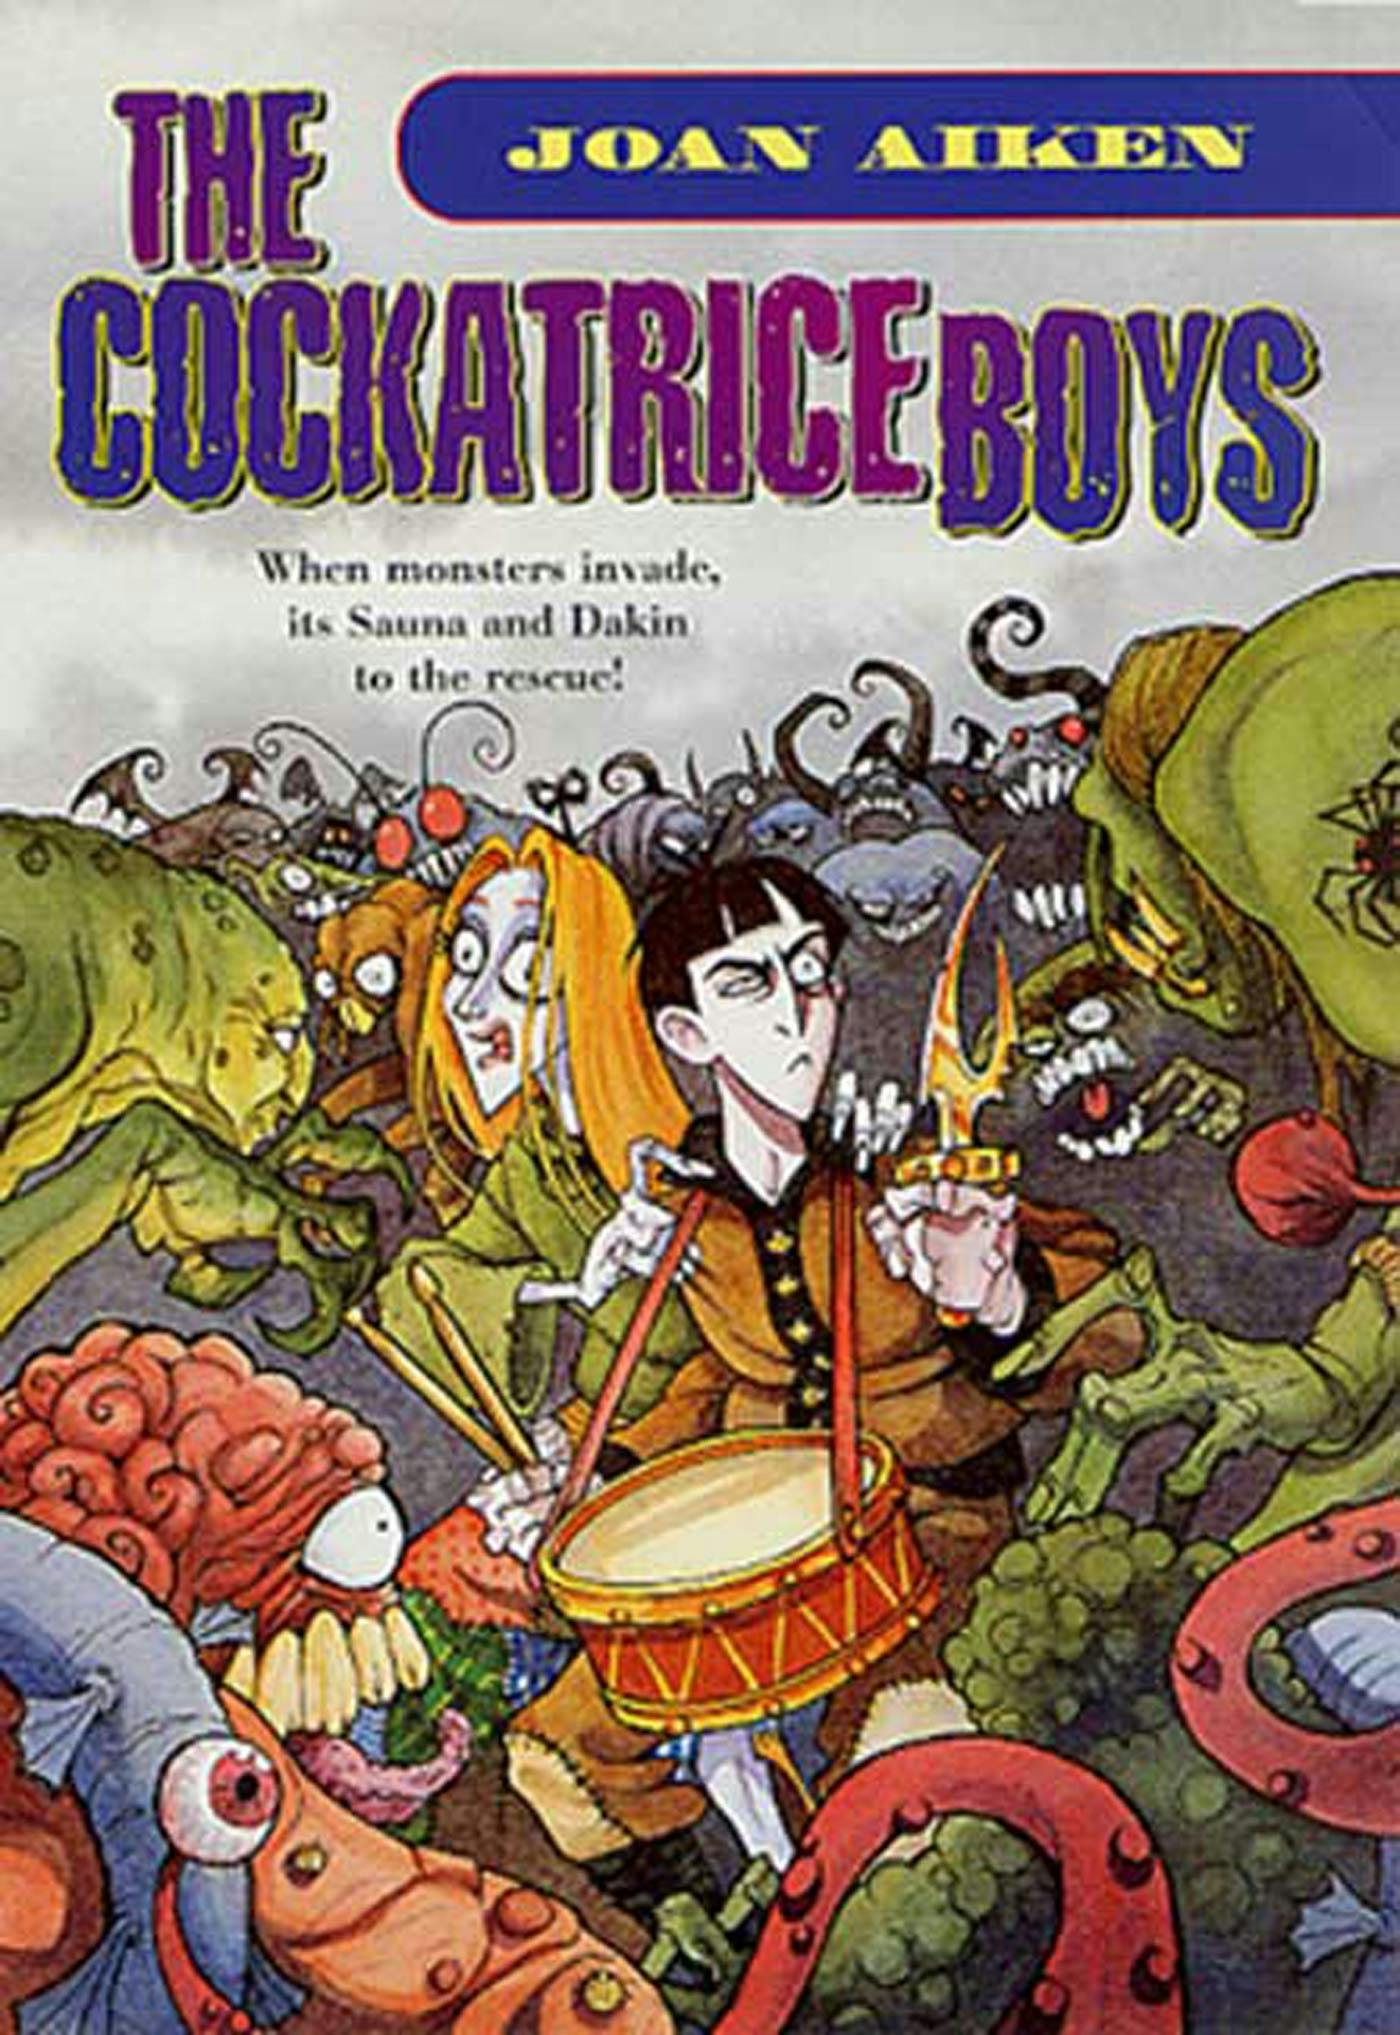 Cover for the book titled as: The Cockatrice Boys